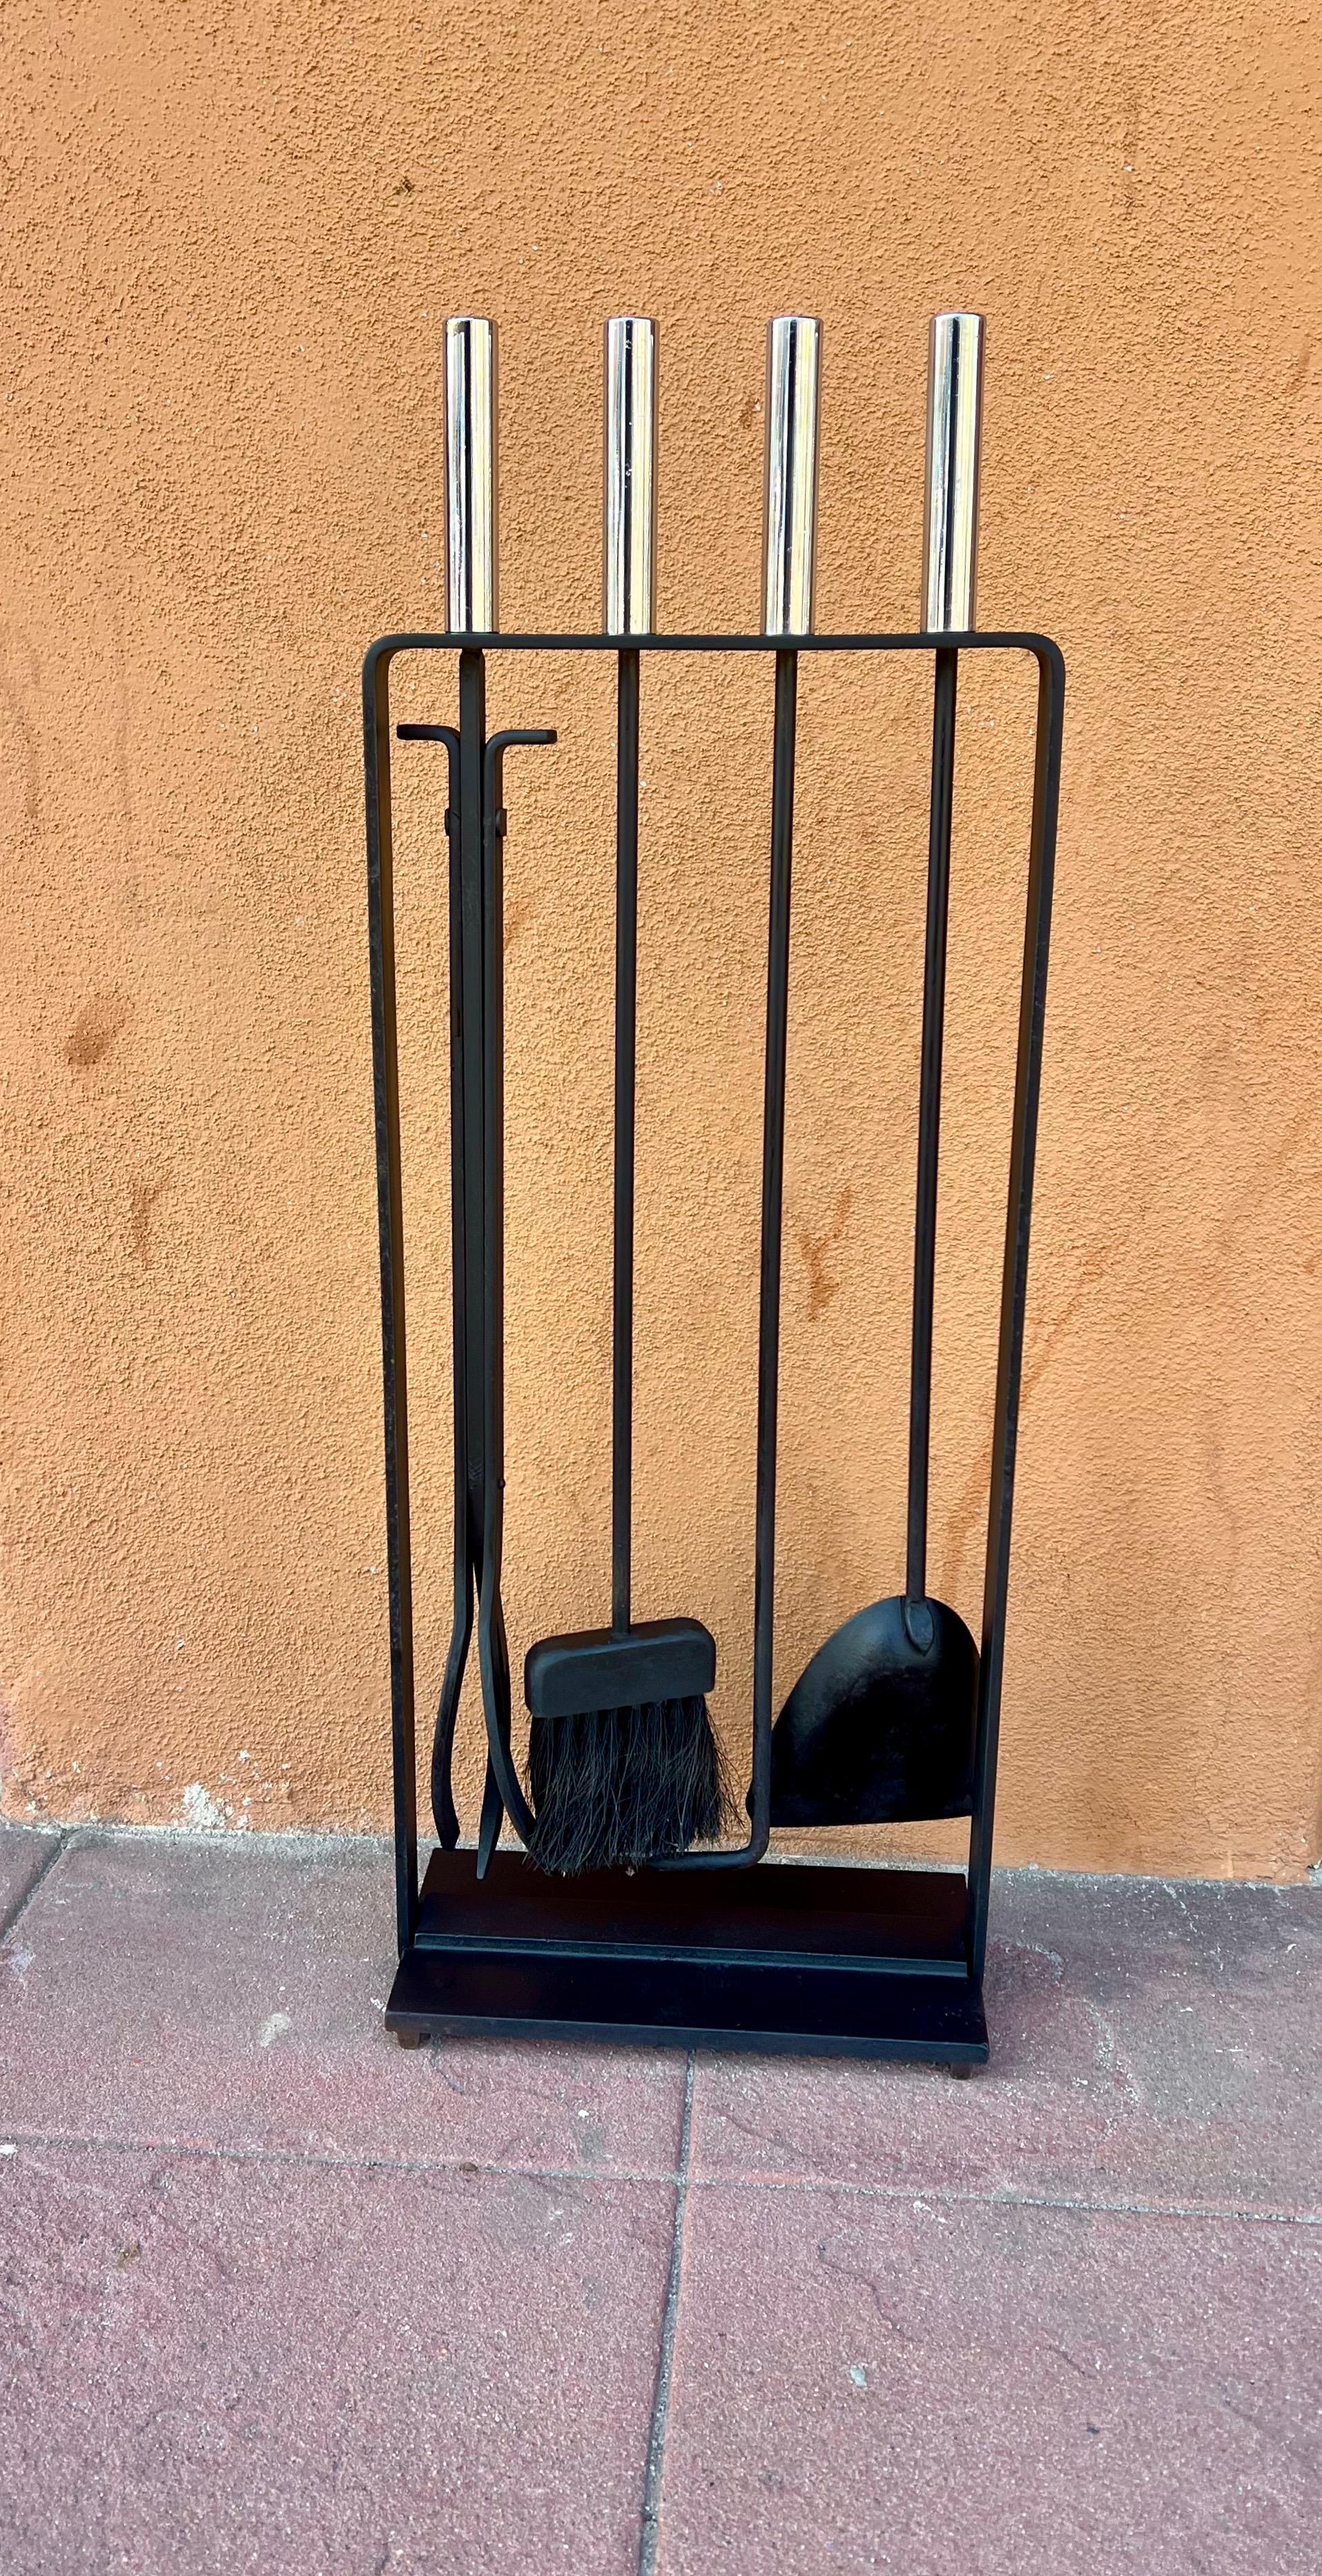 20th Century American Mid-Century Modern Solid Iron Modernist Set of Fireplace Tools